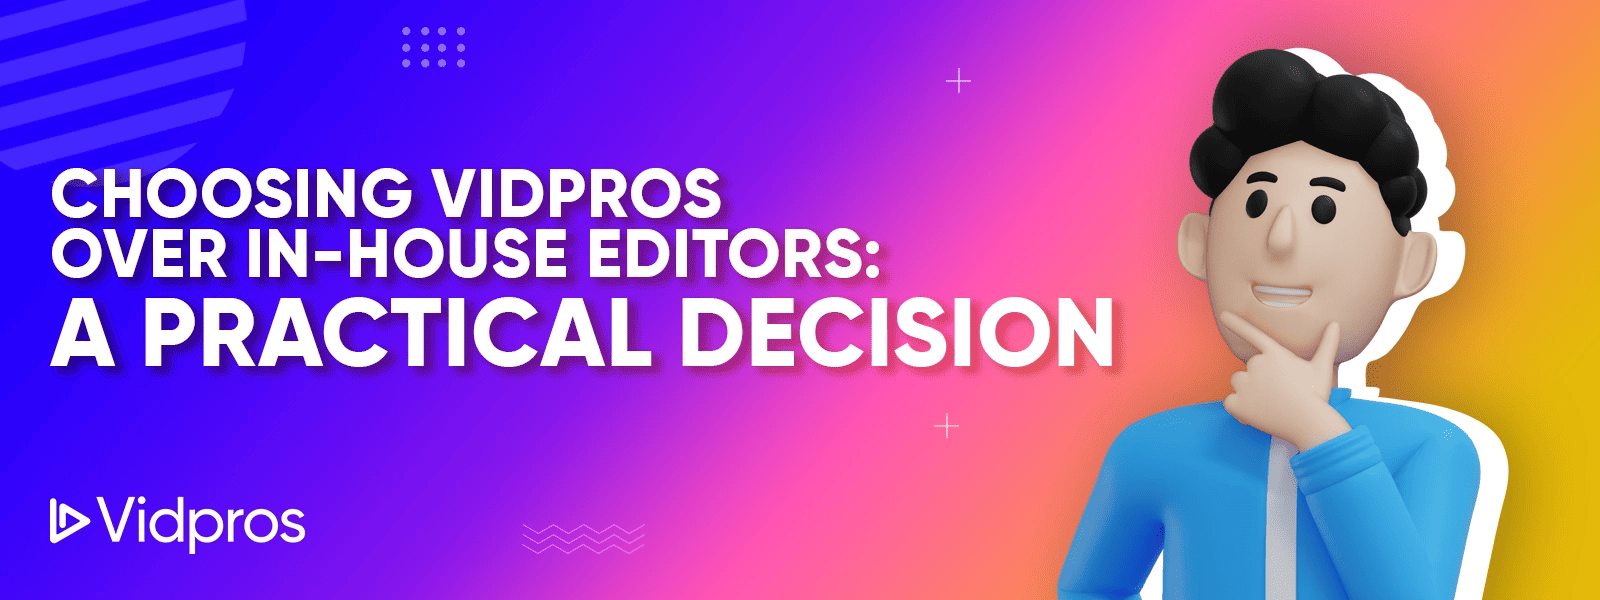 Vidpros over In House Editors